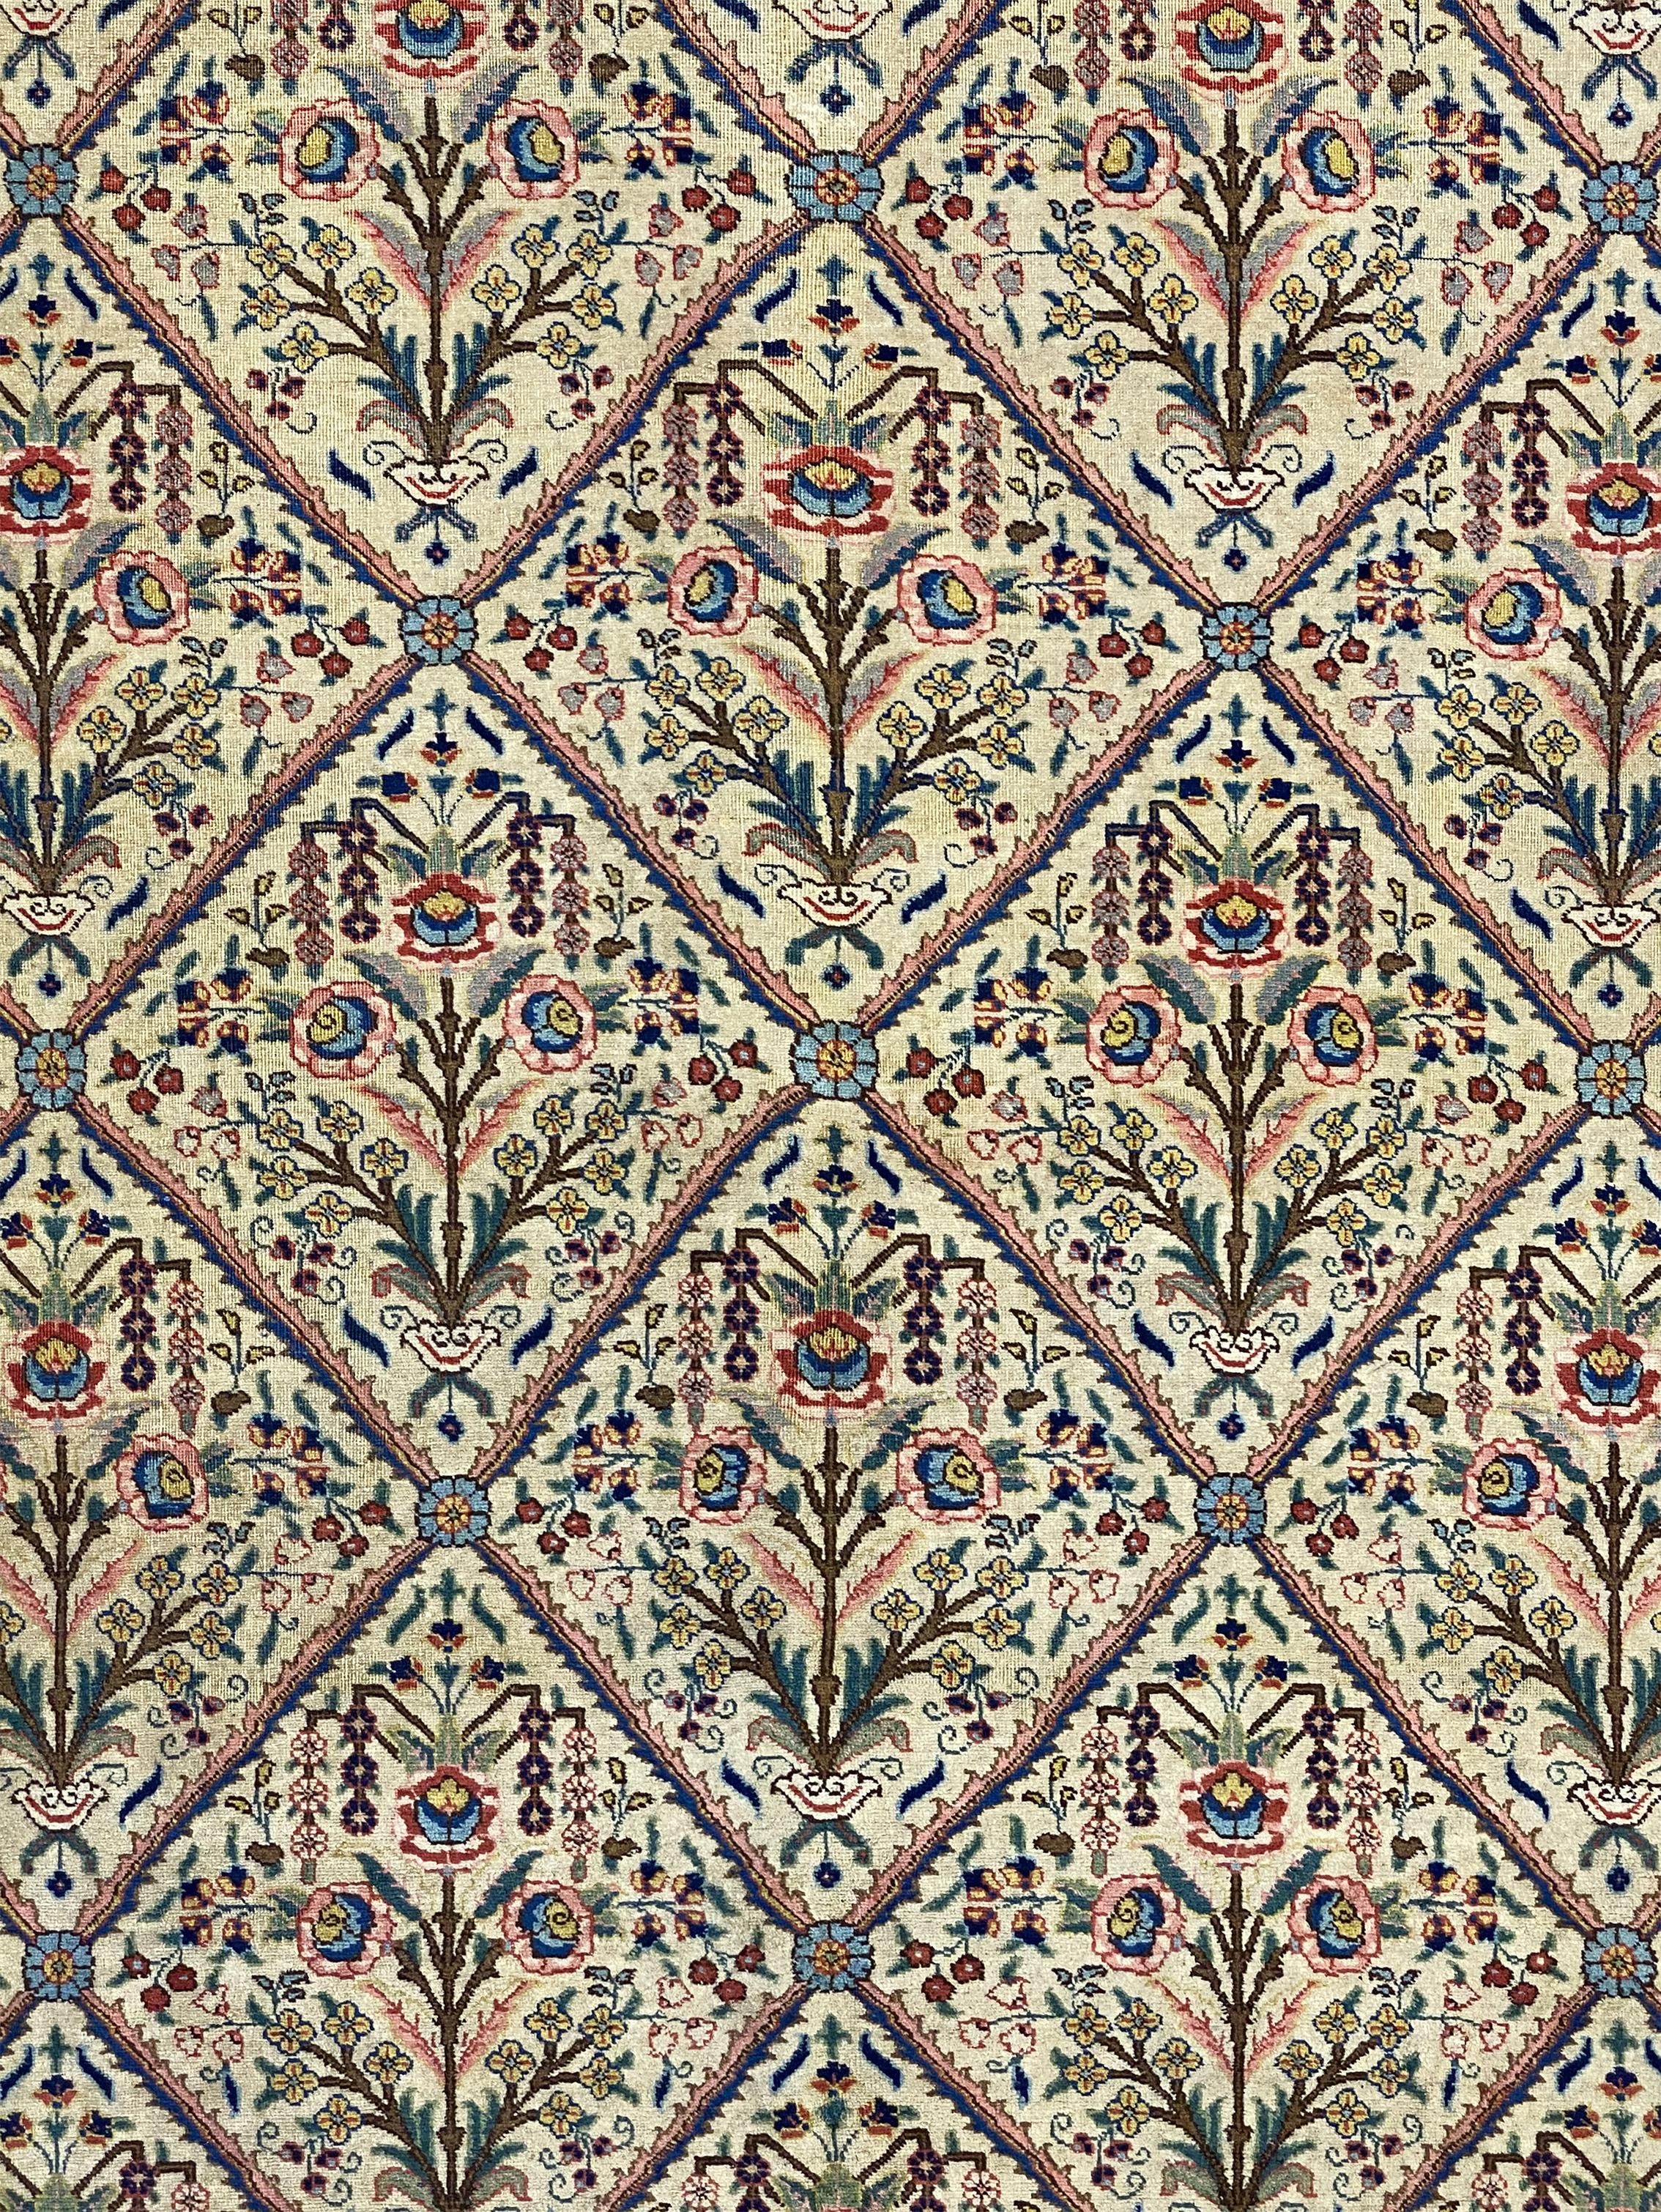 In wonderful condition, this Persian Khoy is rare to find. Khoy is a suburb of Tabriz and was the hub of the most exotic and unusual pieces to come from that region. Hand knotted with wonderful wool, gorgeous color combination, and fine technique of